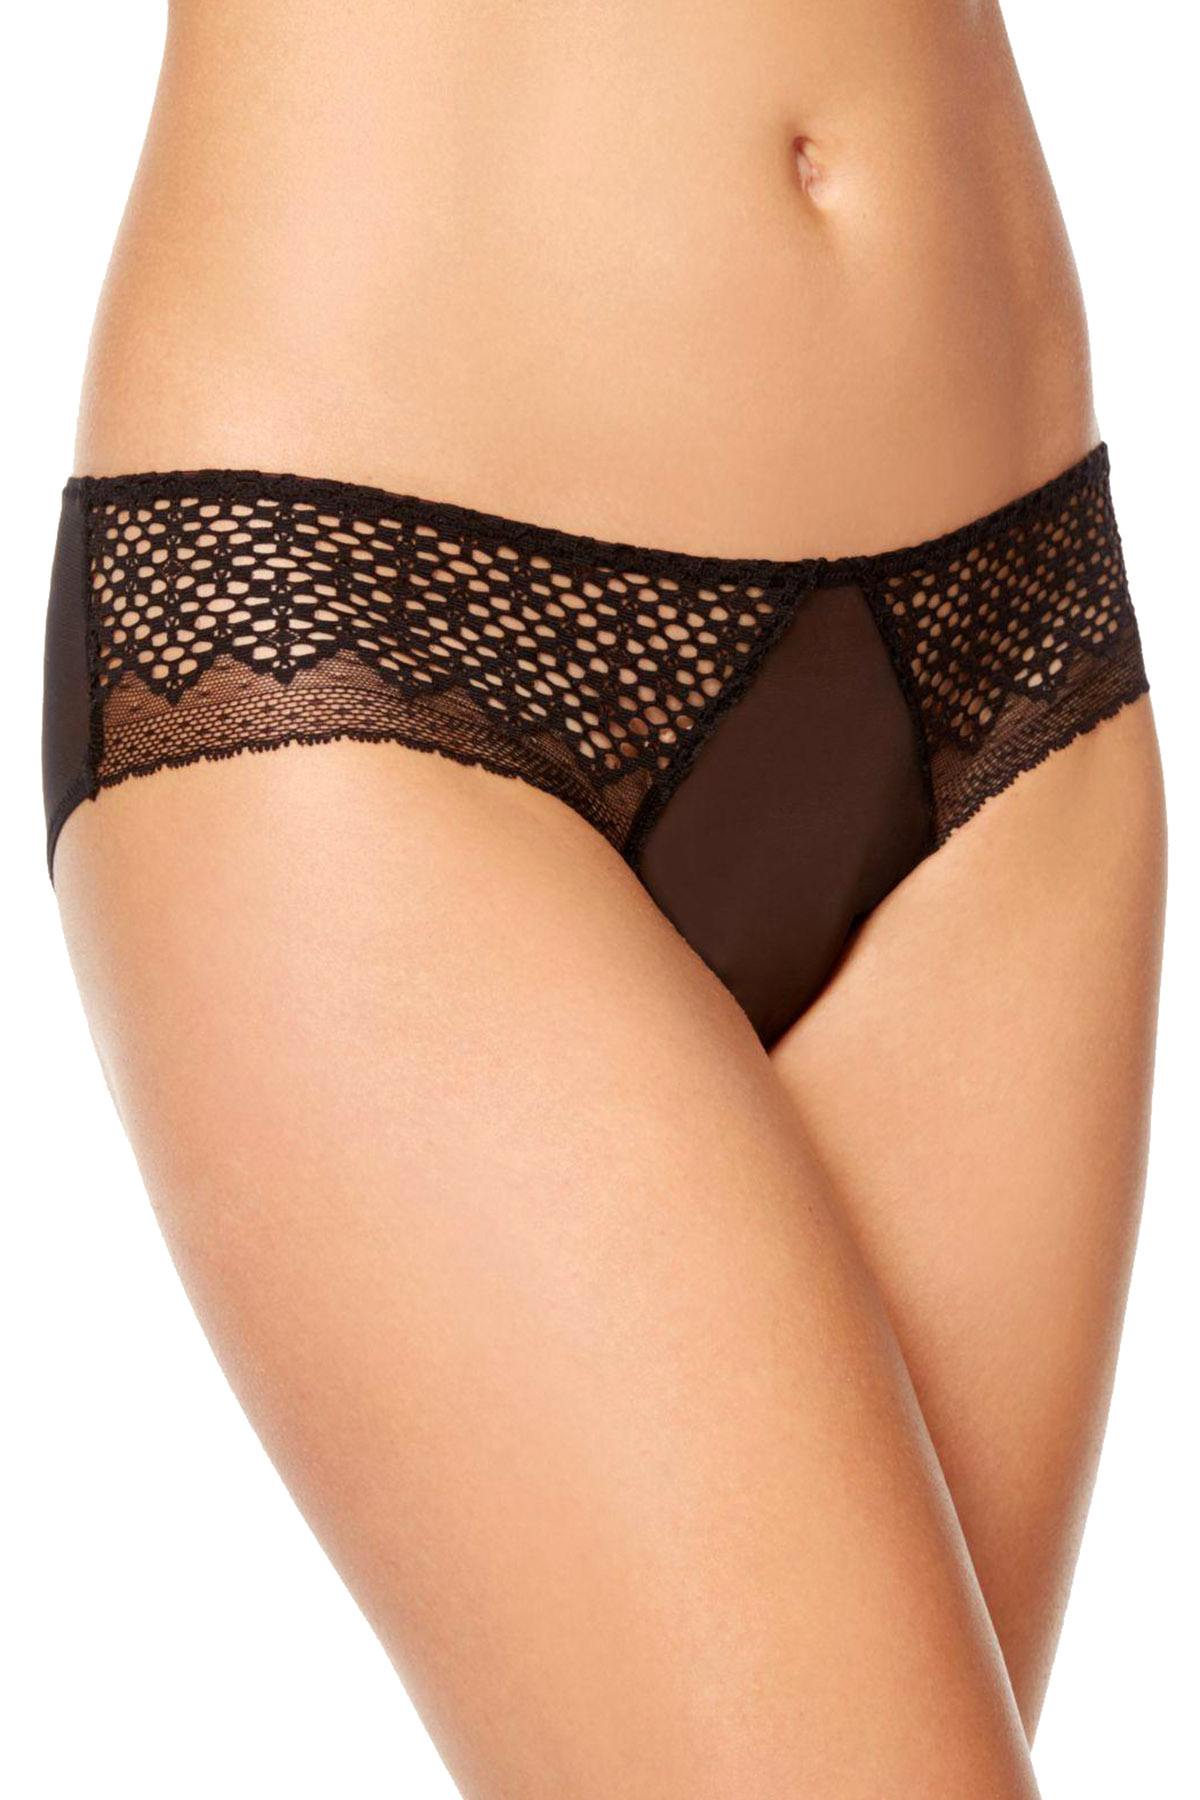 DKNY Black Sheer Lace Hipster